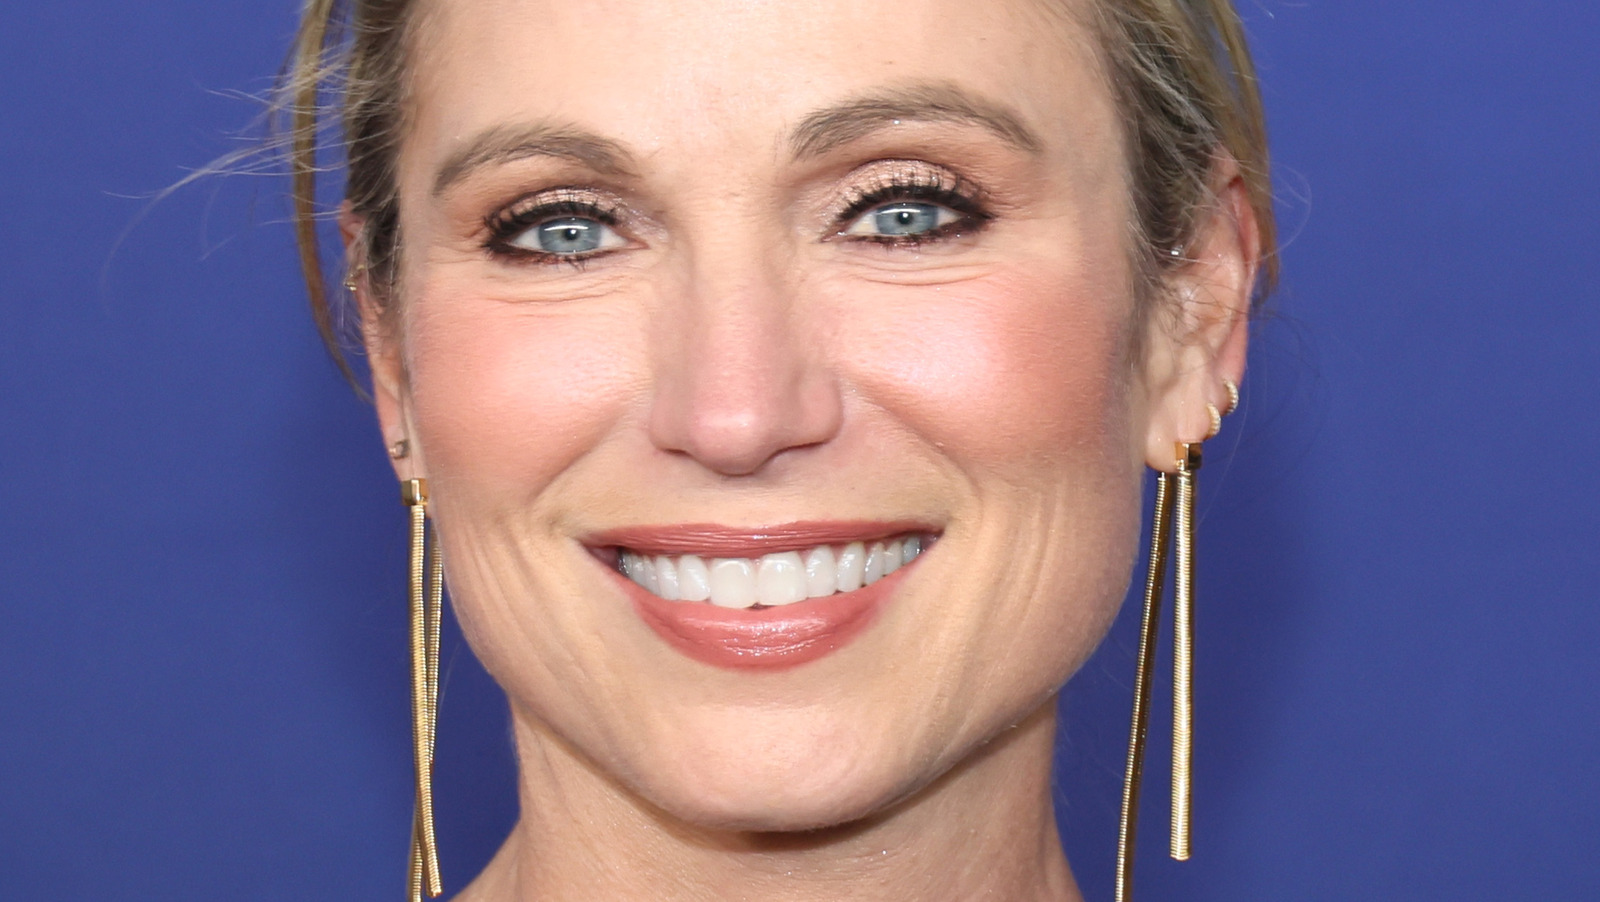 Amy Robach And TJ Holmes Are Unlikely To Return To GMA Anytime Soon